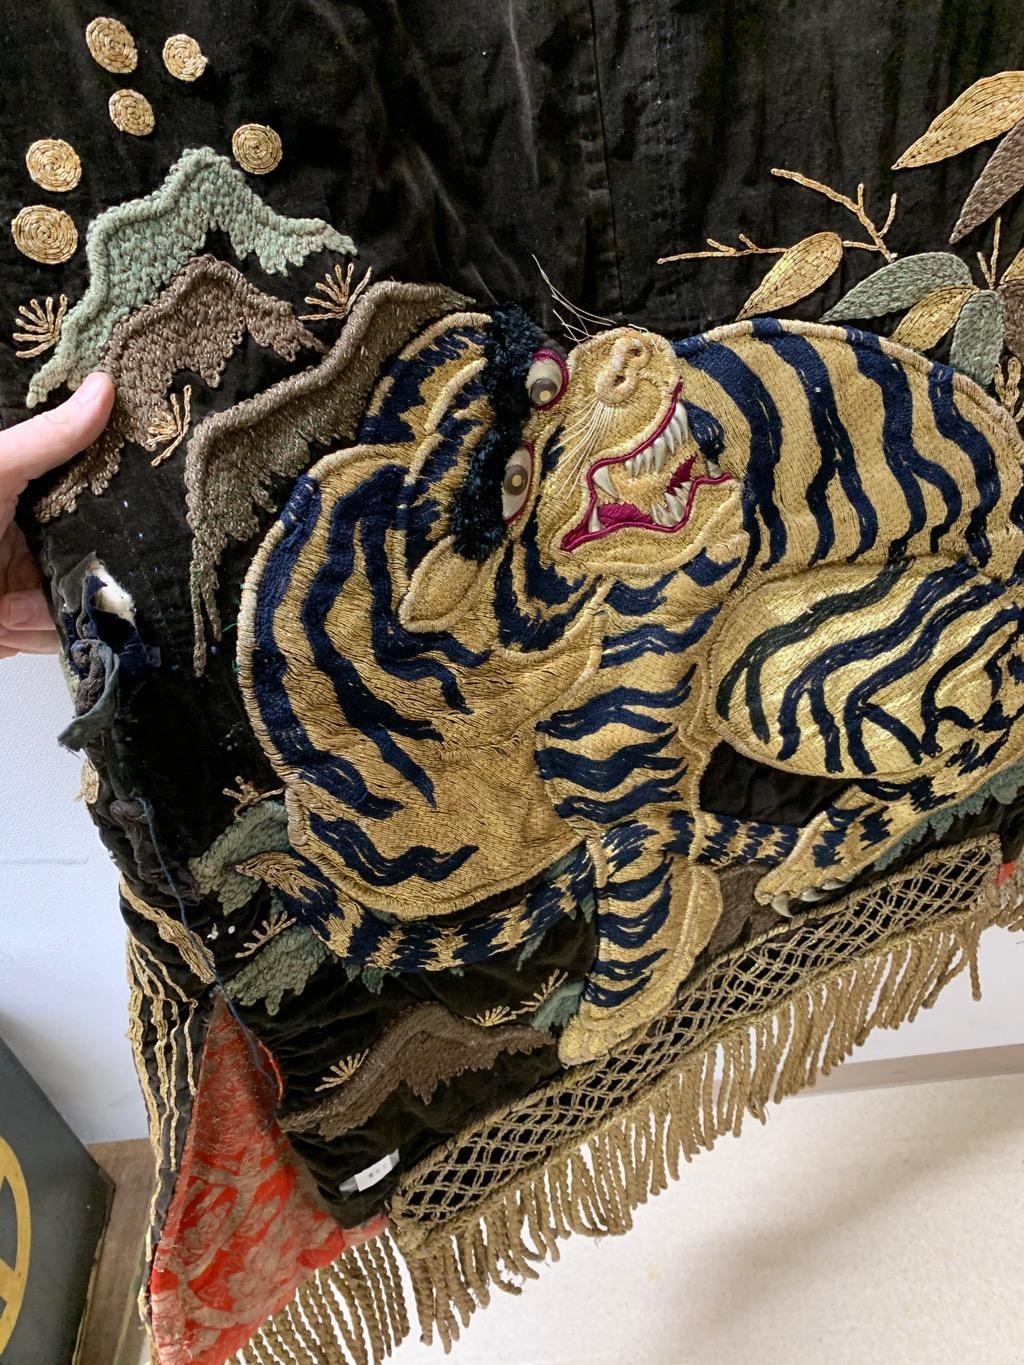 From our recent Japanese Acquisitions Travels

Unique collectible opportunity- Immediately frameable

This 130 year old Japanese Kyogen Noh Theater Dance kimono is a stunning example of the finest Japanese textile craft. 

Hand decorated with a